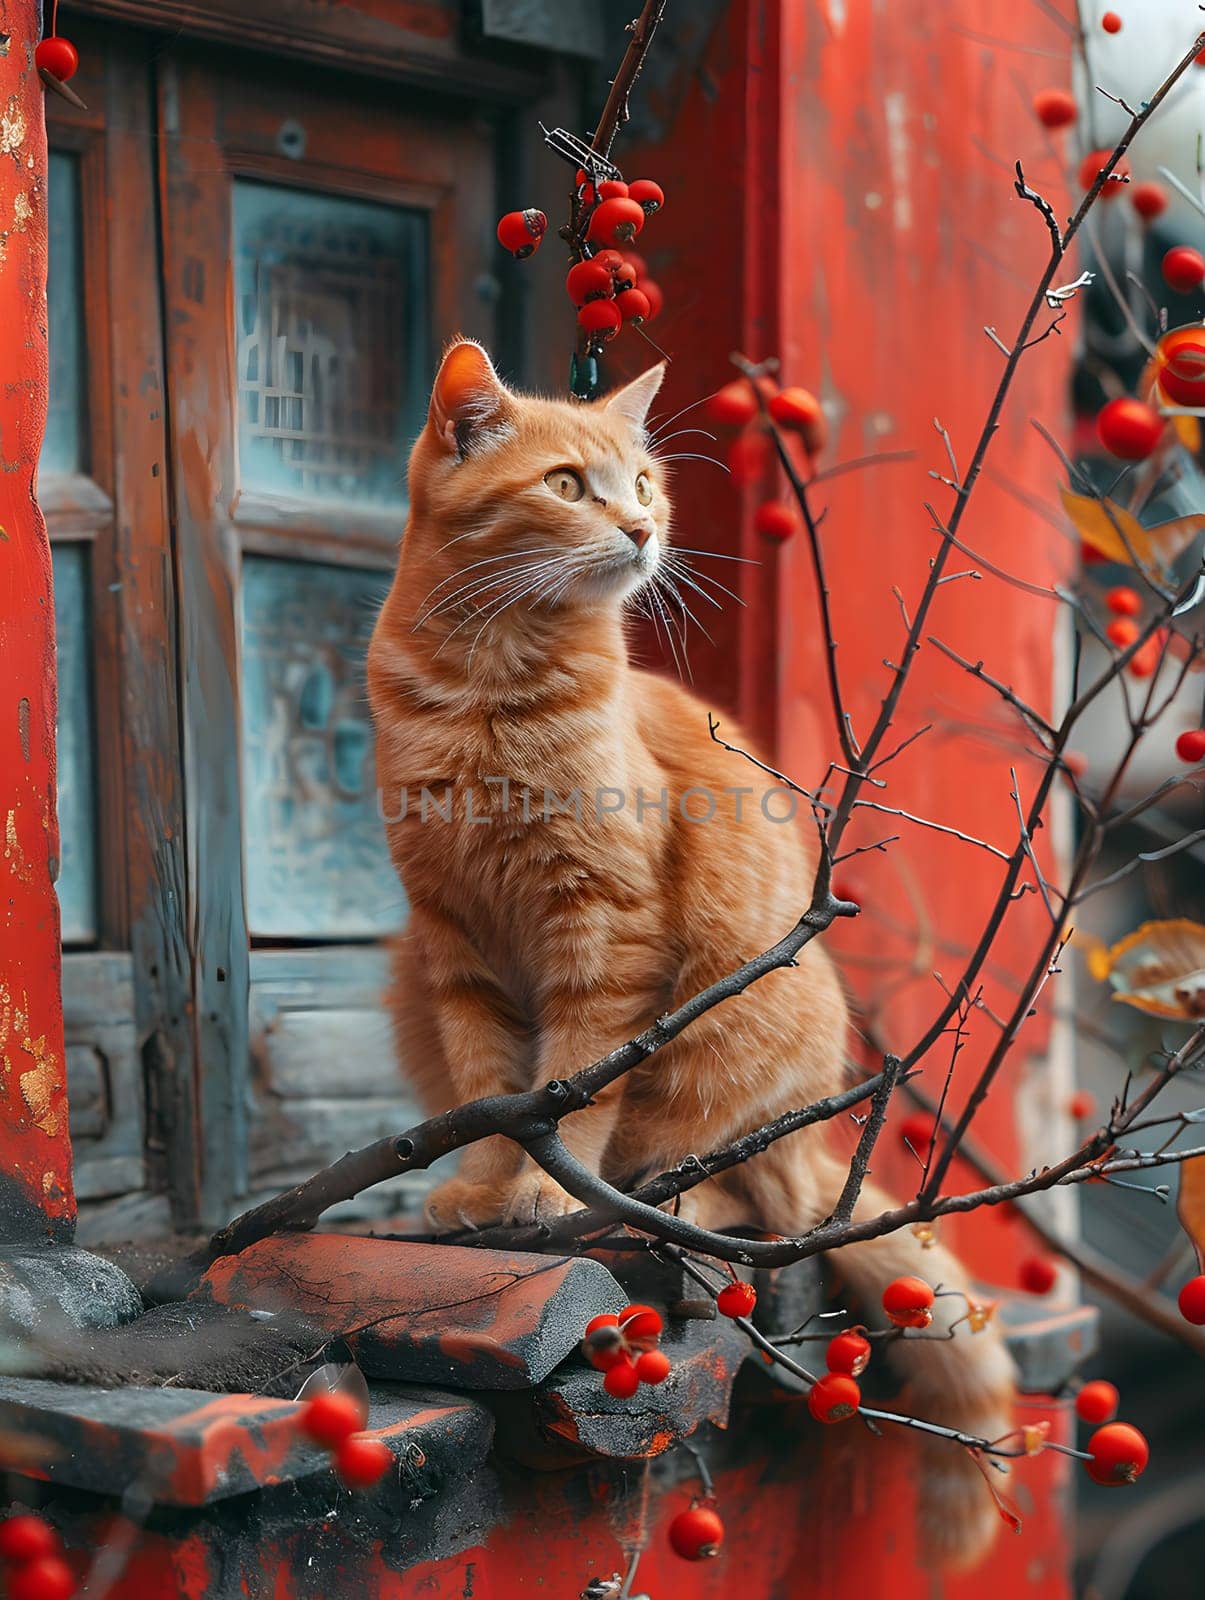 An orange Felidae with whiskers sits on a branch with red berries by Nadtochiy